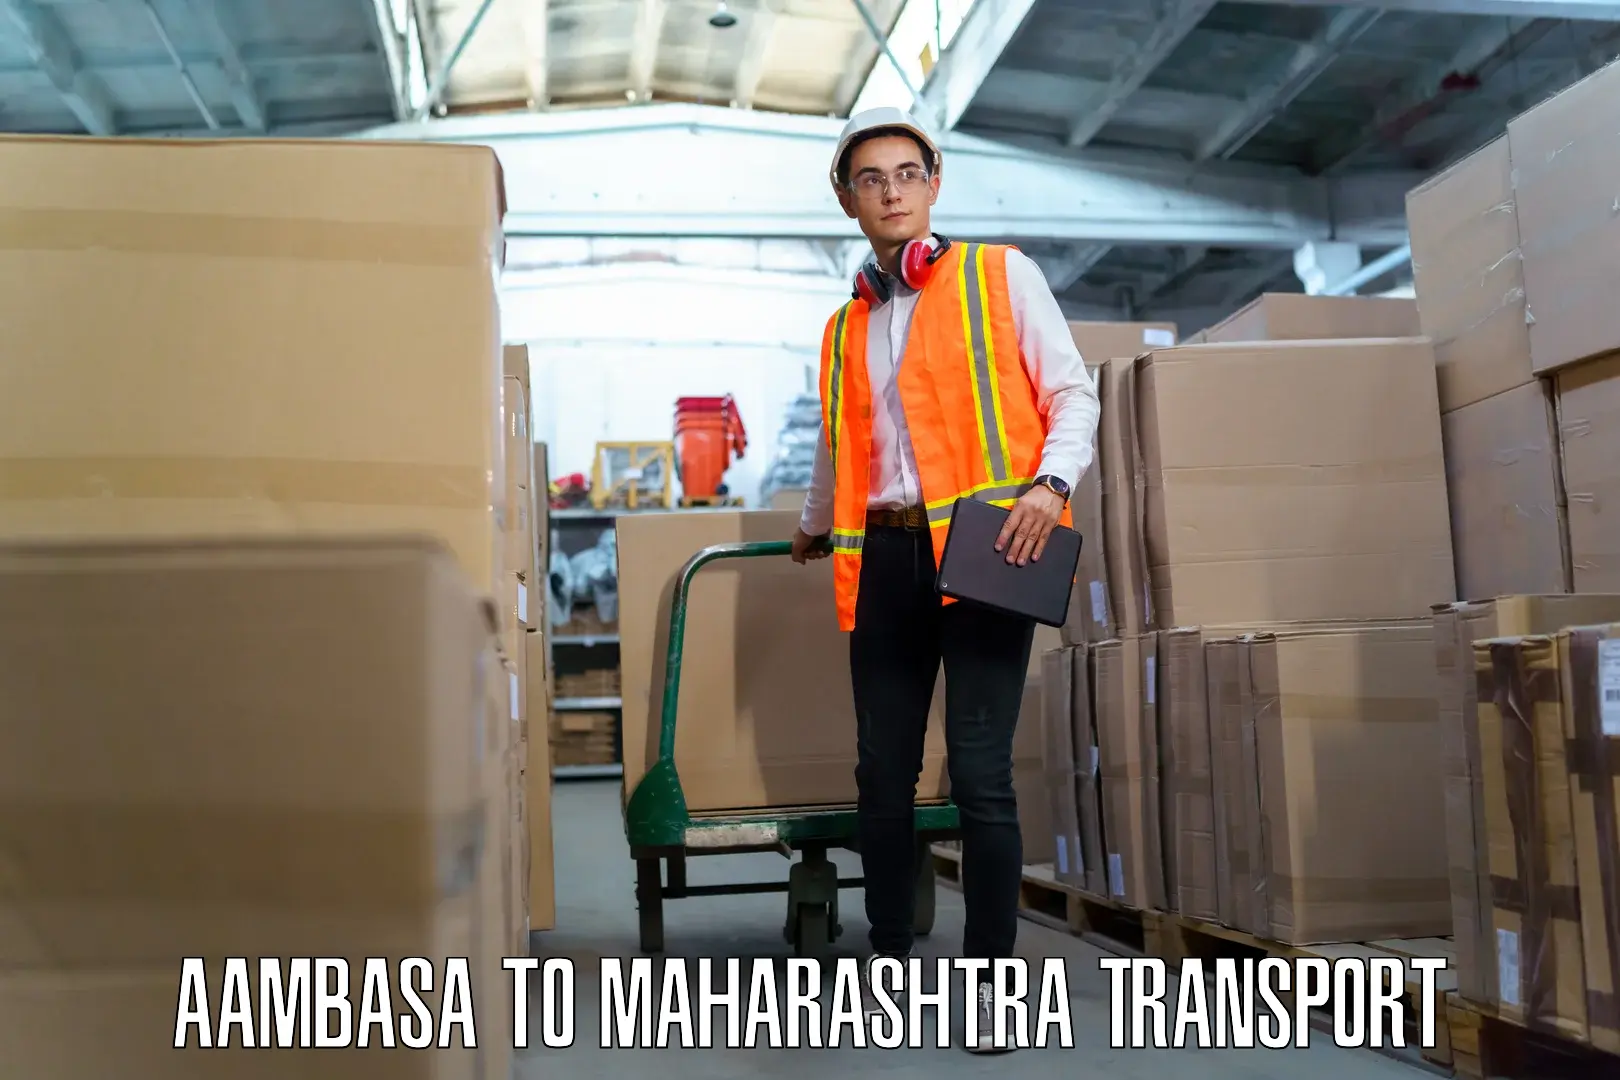 Truck transport companies in India Aambasa to Alephata